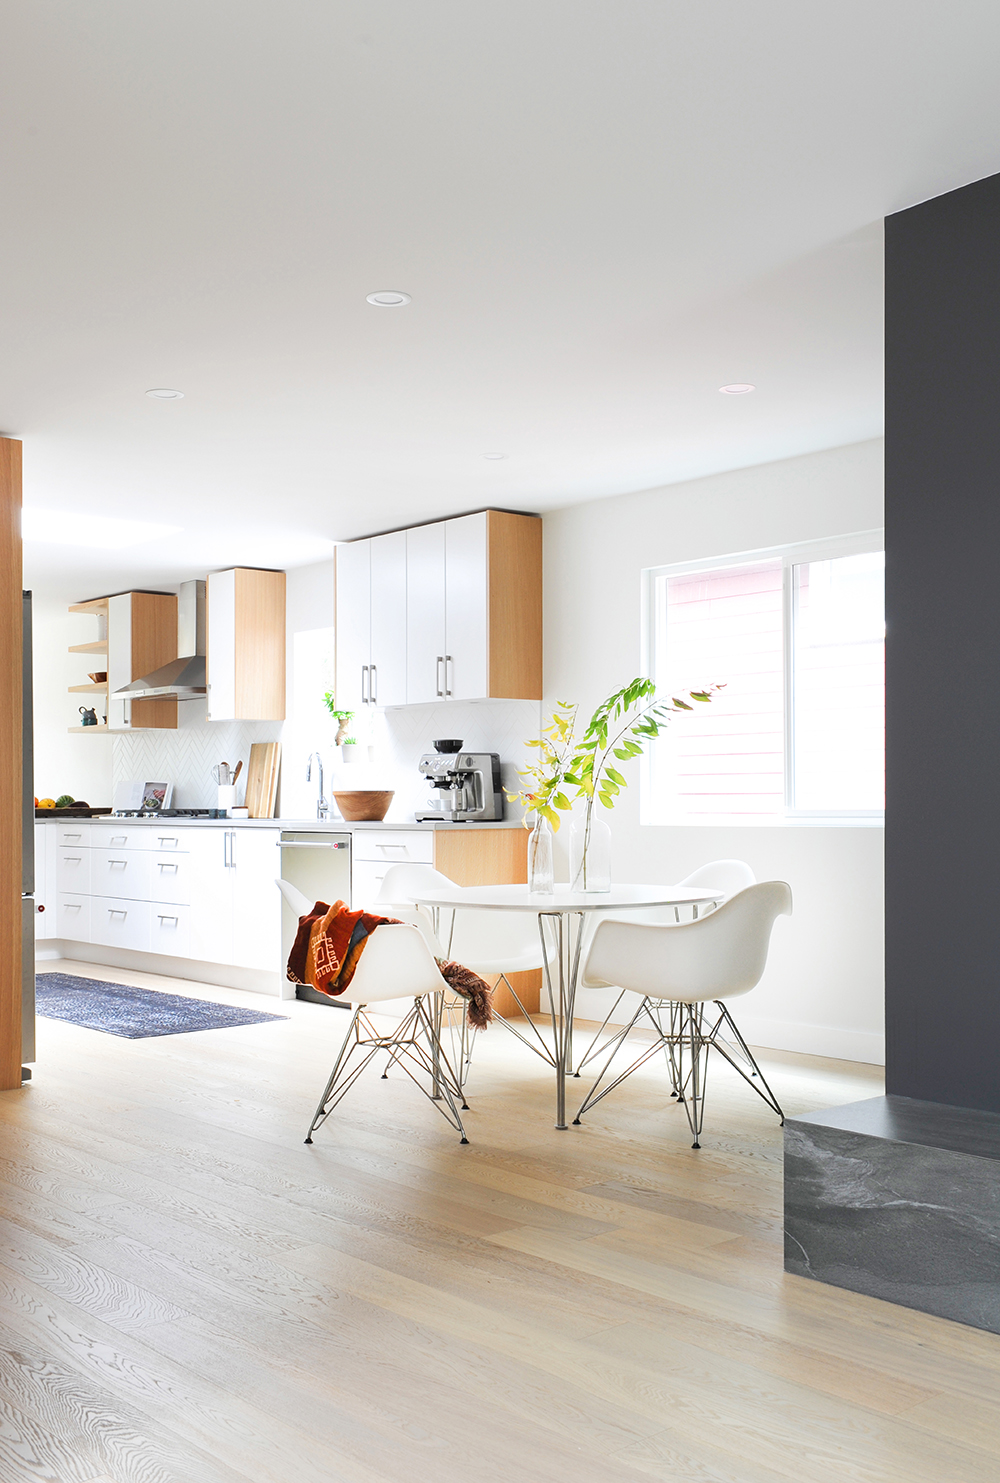 Varying wood tones animate the mostly white kitchen.